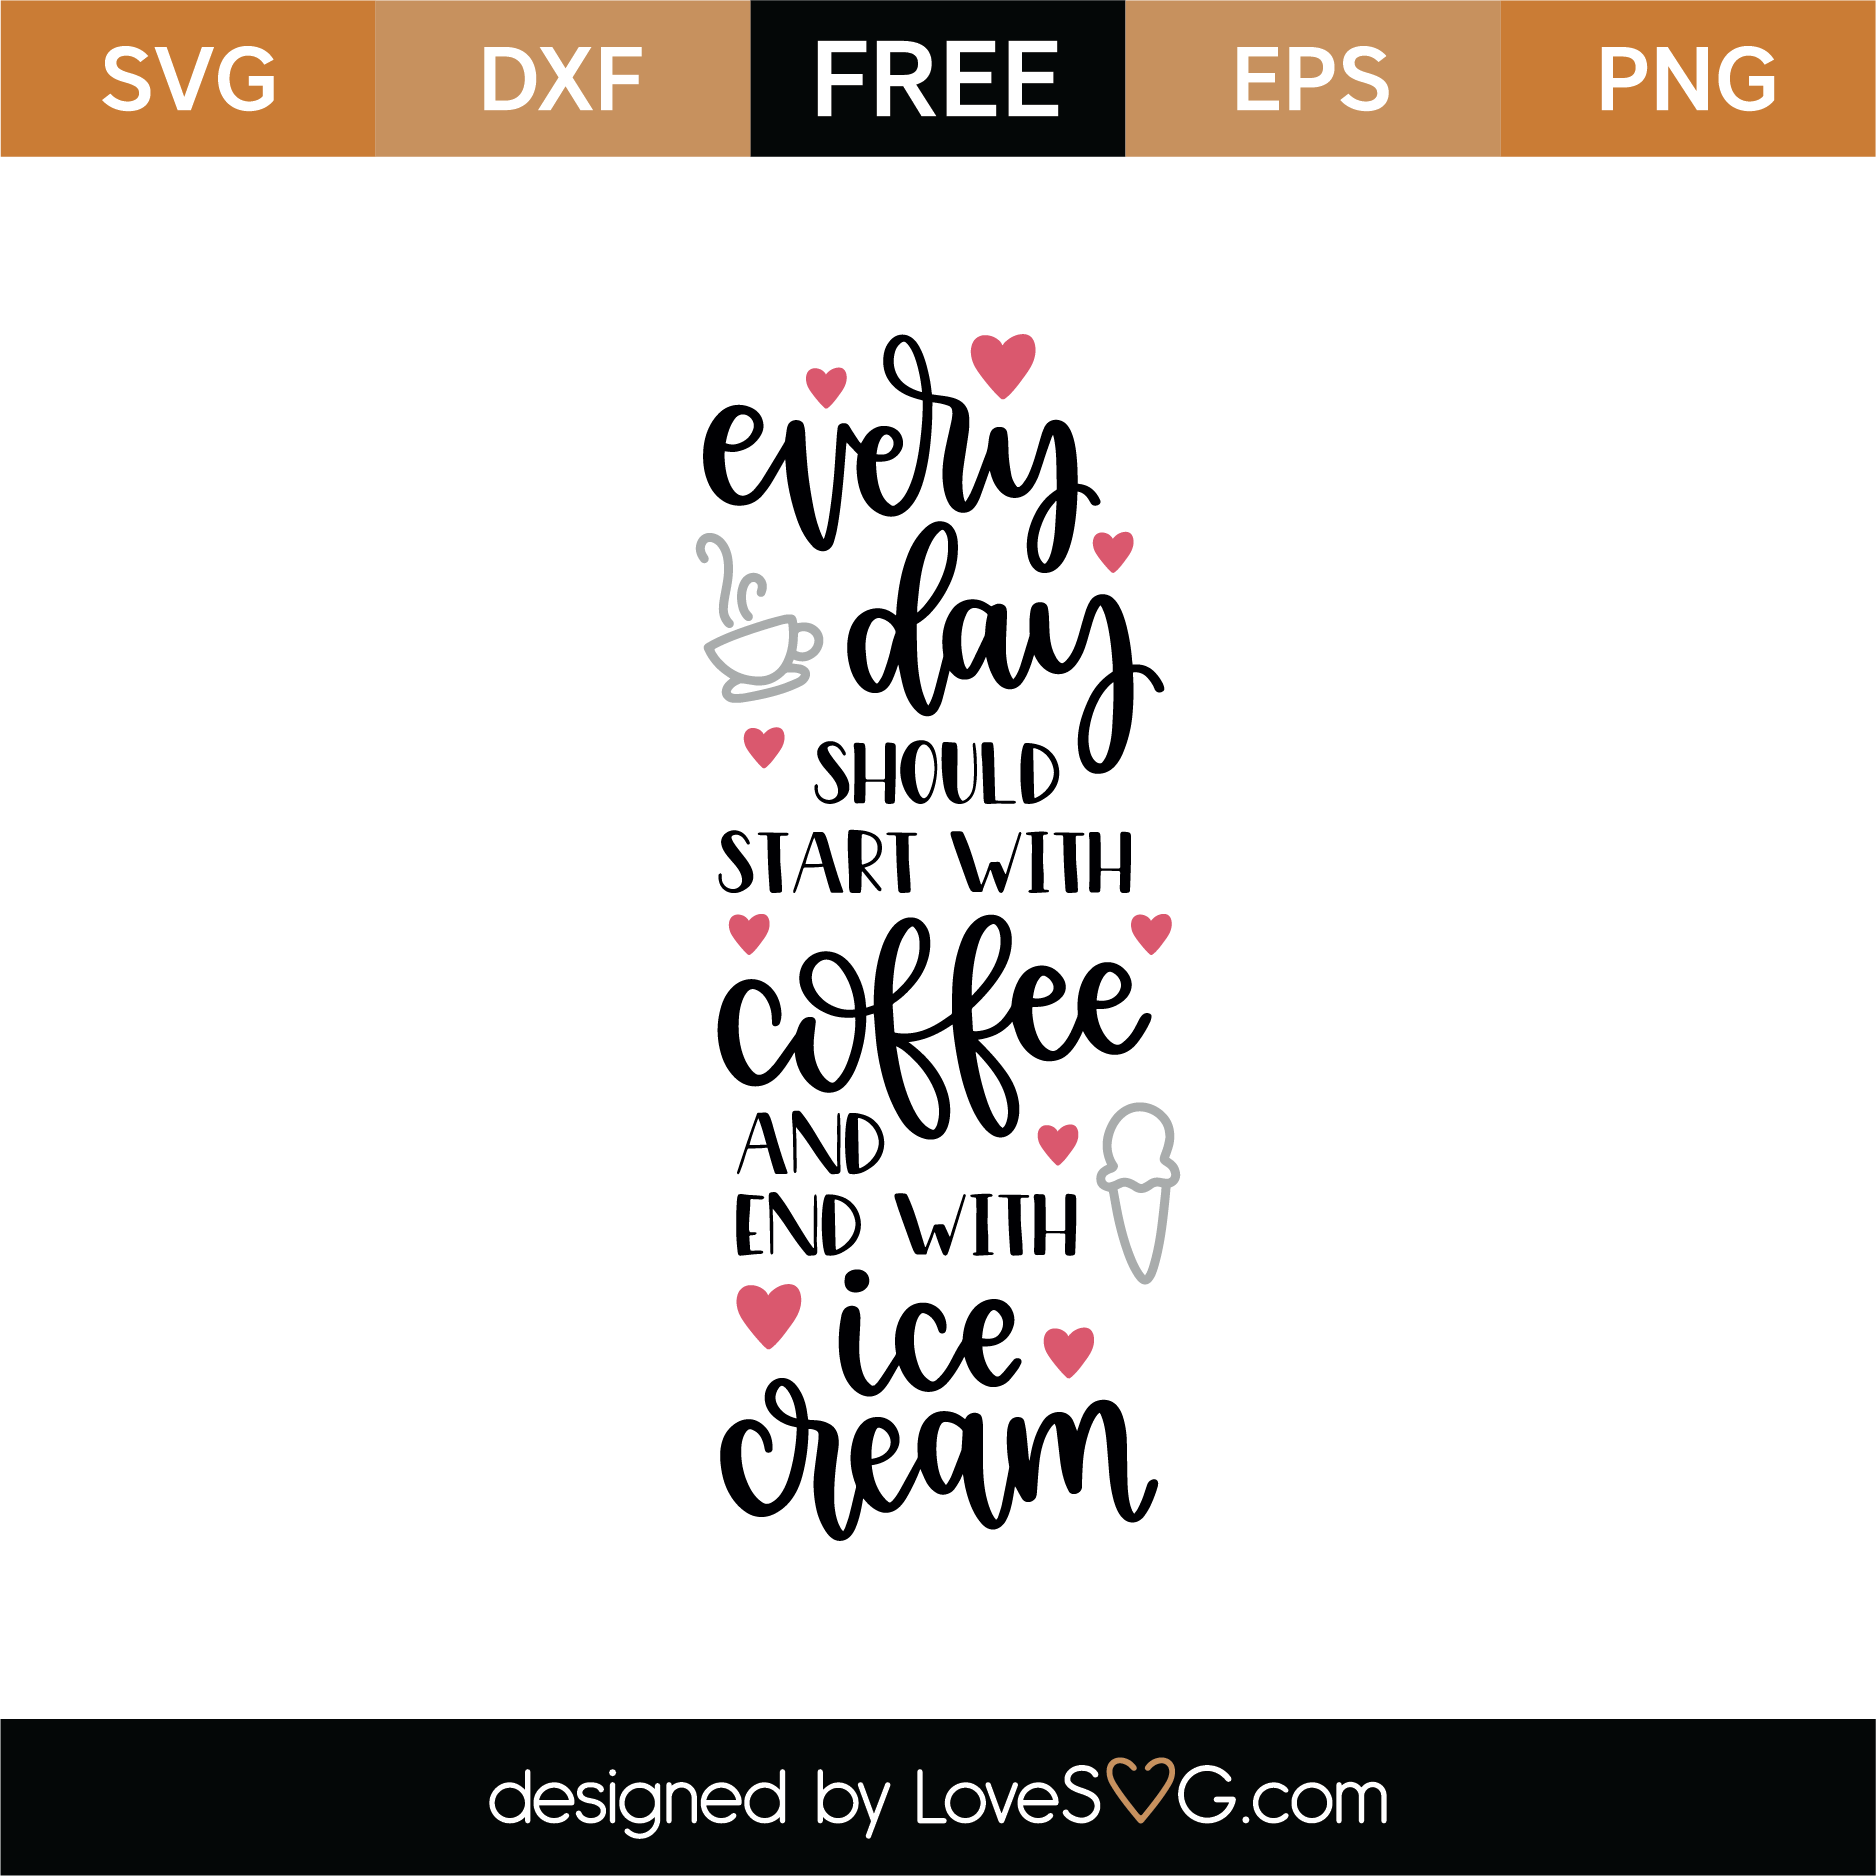 Download Free Start With Coffee And End With Ice Cream SVG Cut File | Lovesvg.com